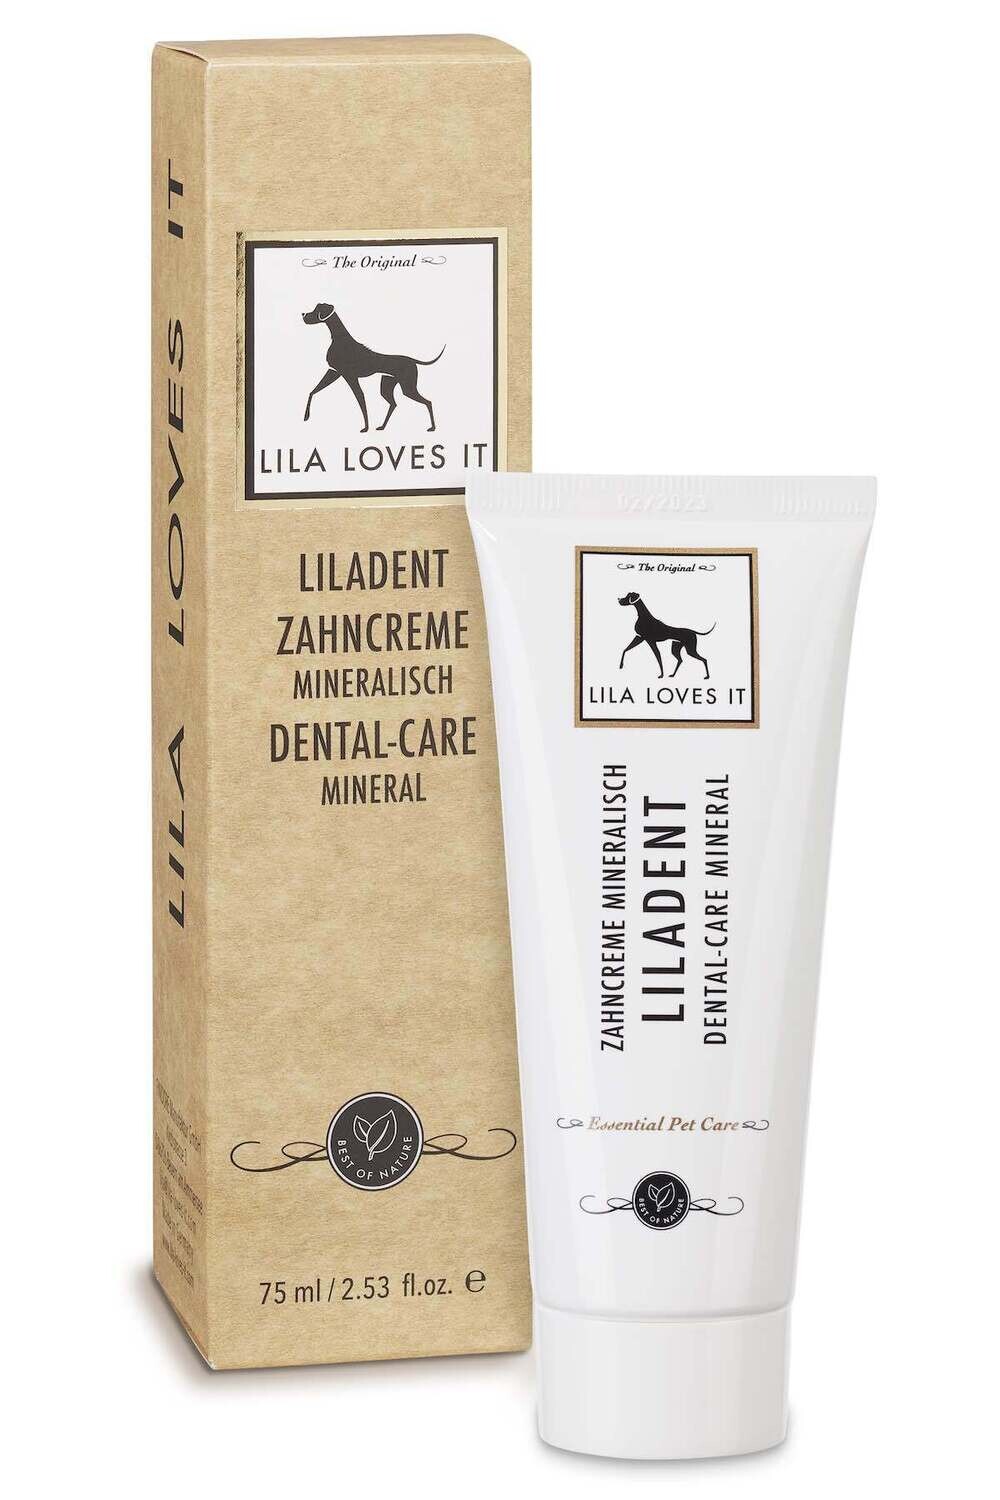 Lila Loves It Liladent Zahncreme 75ml